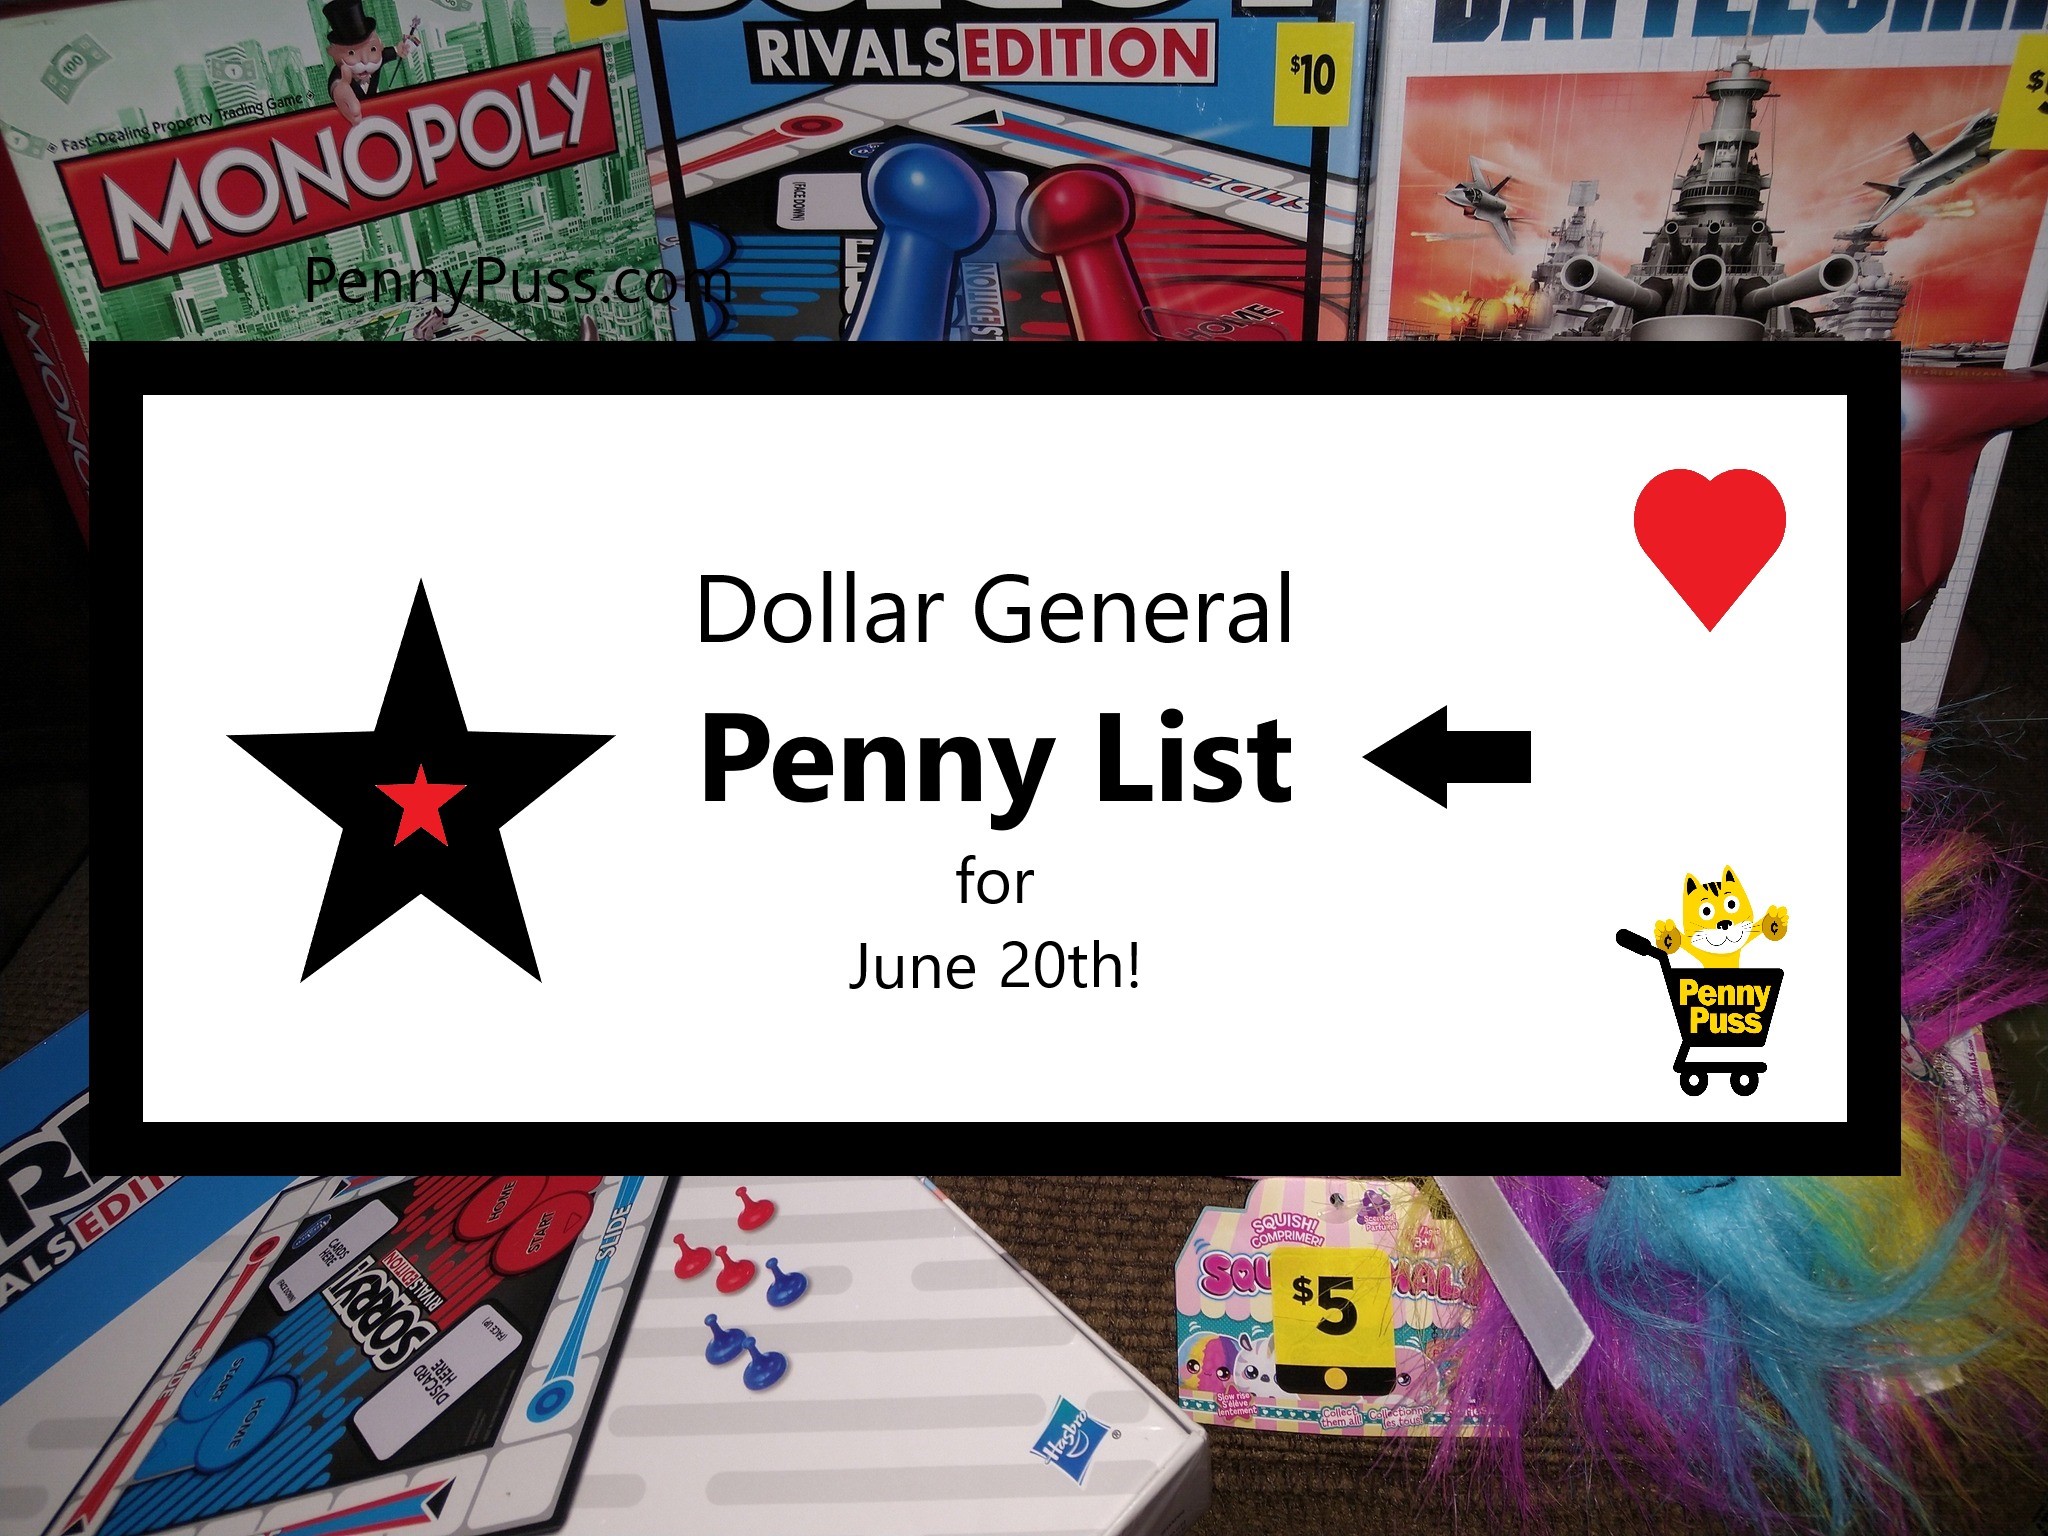 Dollar General Penny List for June 20th!